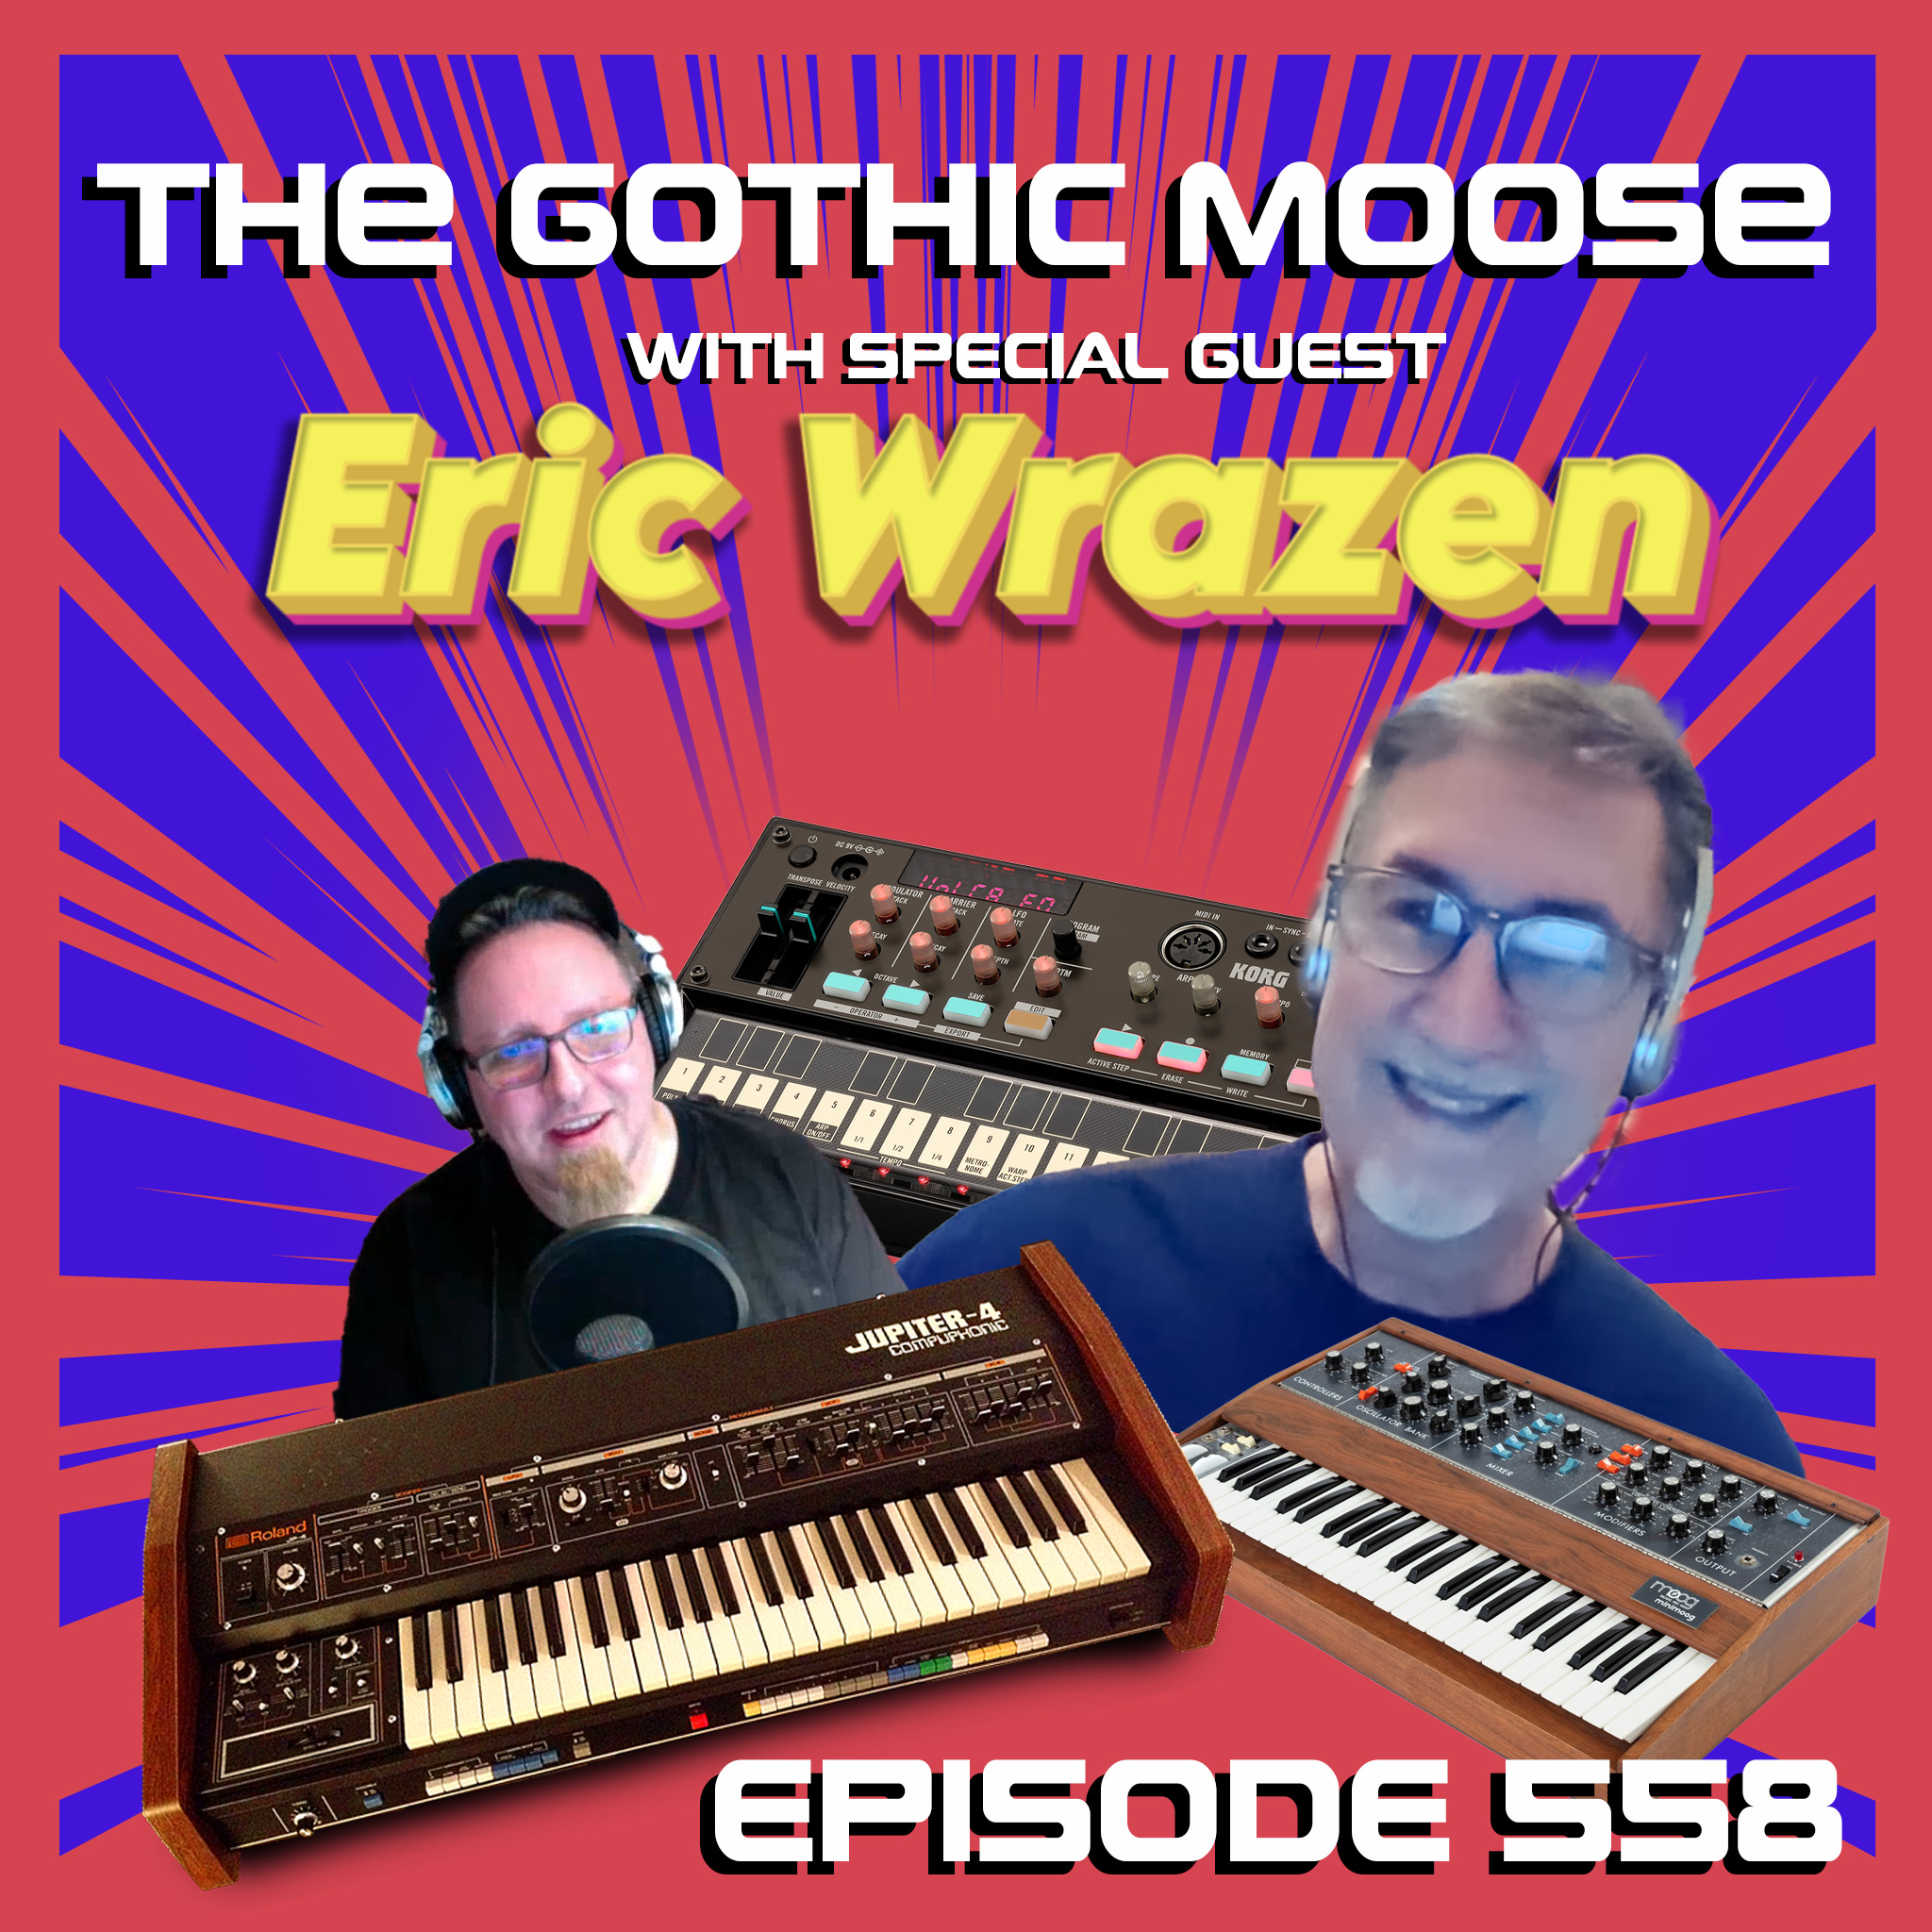 The Gothic Moose goes Synthpocalypse – Episode 558 – with Special Guest Eric Wrazen